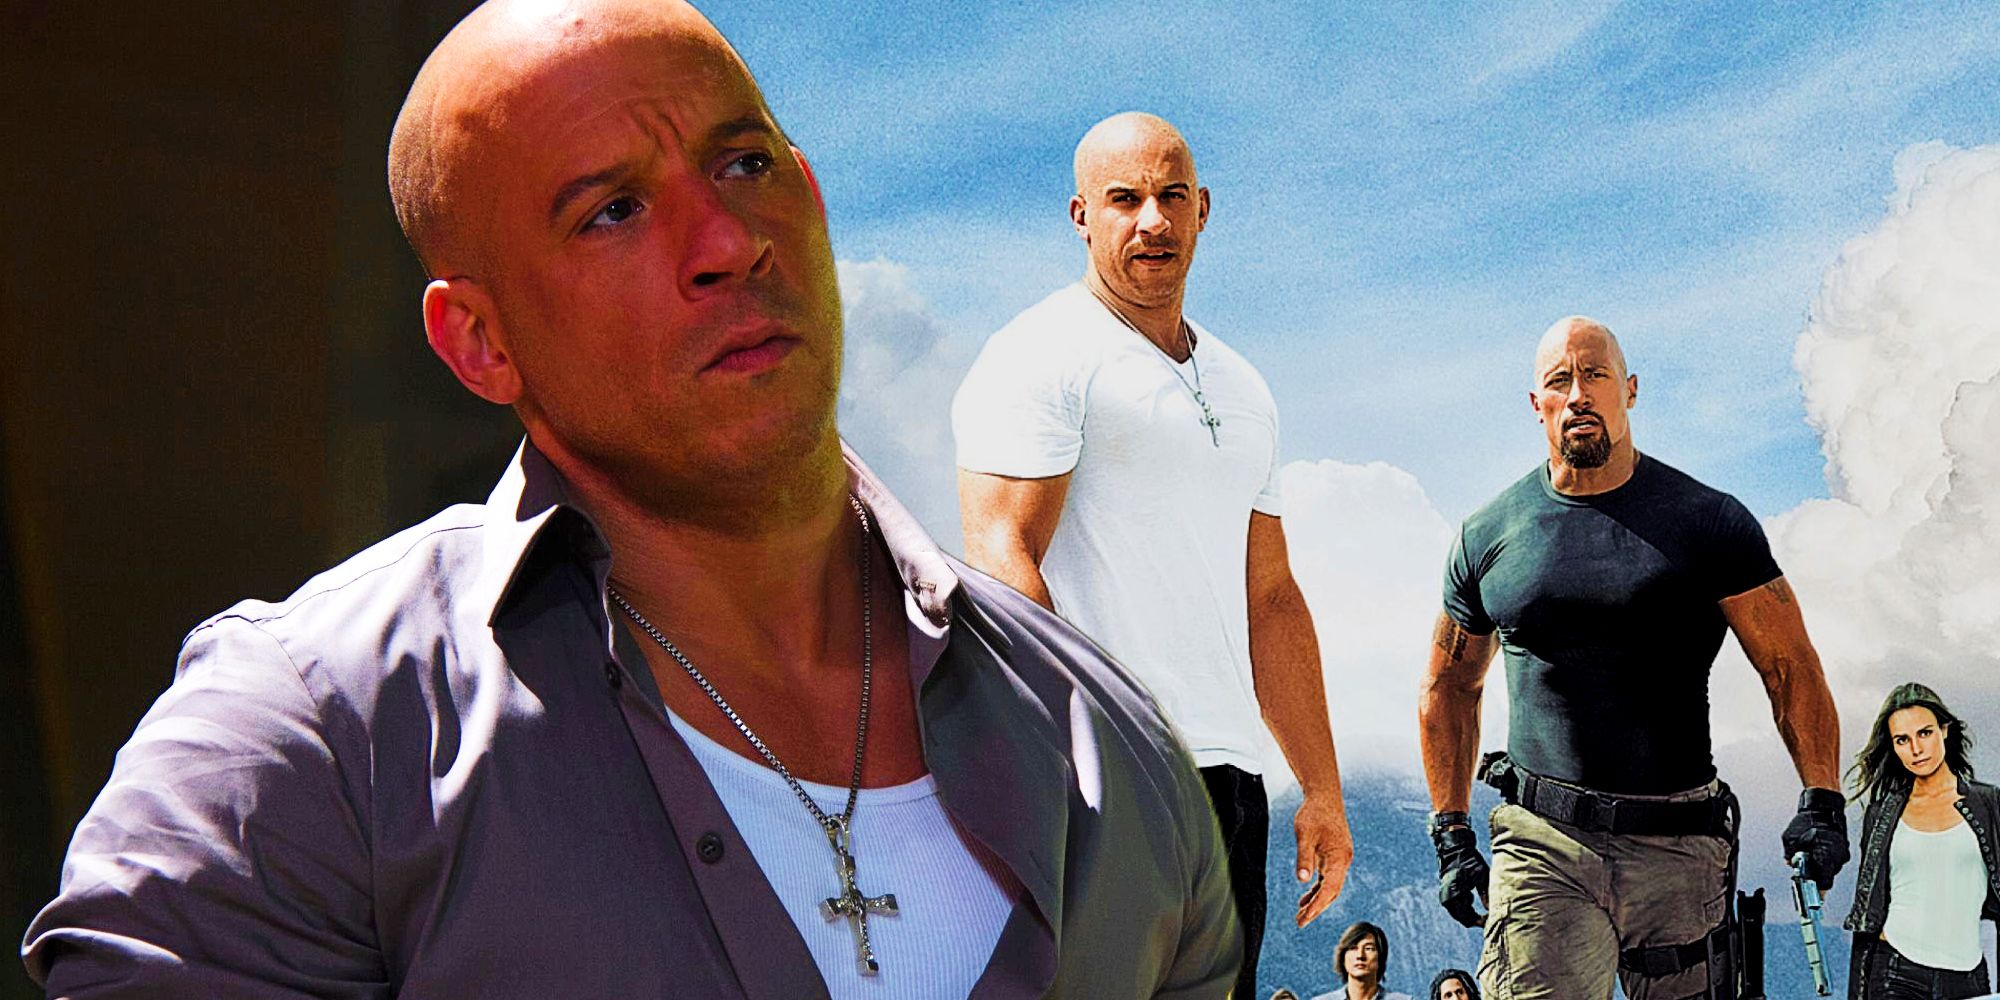 Vin Diesel as Dominic Toretto in Furious 7 and the Fast Five poster